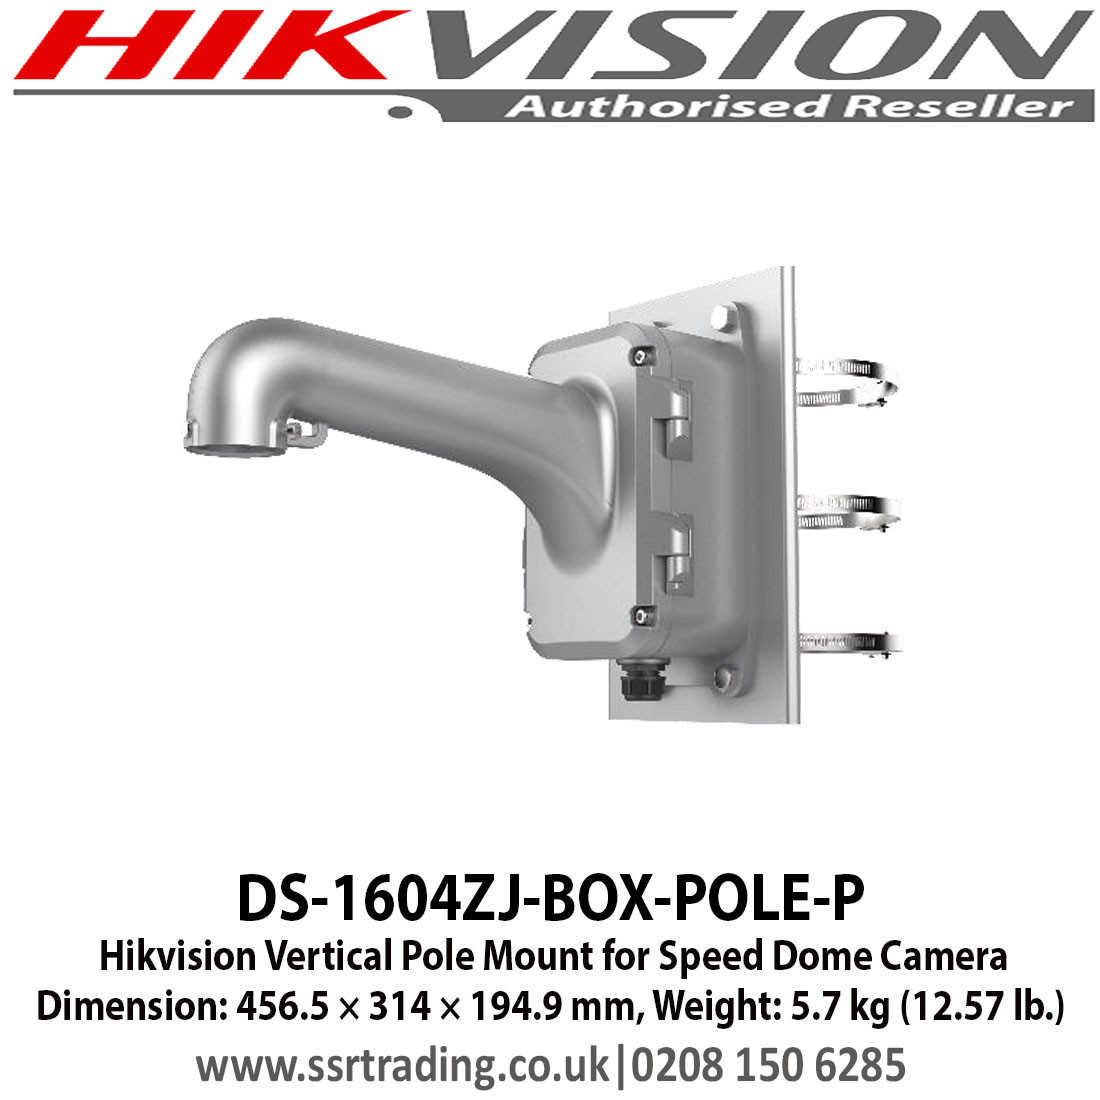 Hikvision DS-1604ZJ-BOX-POLE-P Vertical Pole Mount for Speed Dome Camera  Dimension: 456.5 × 314 × 194.9 mm, Weight: 5.7 kg (12.57 lb.)